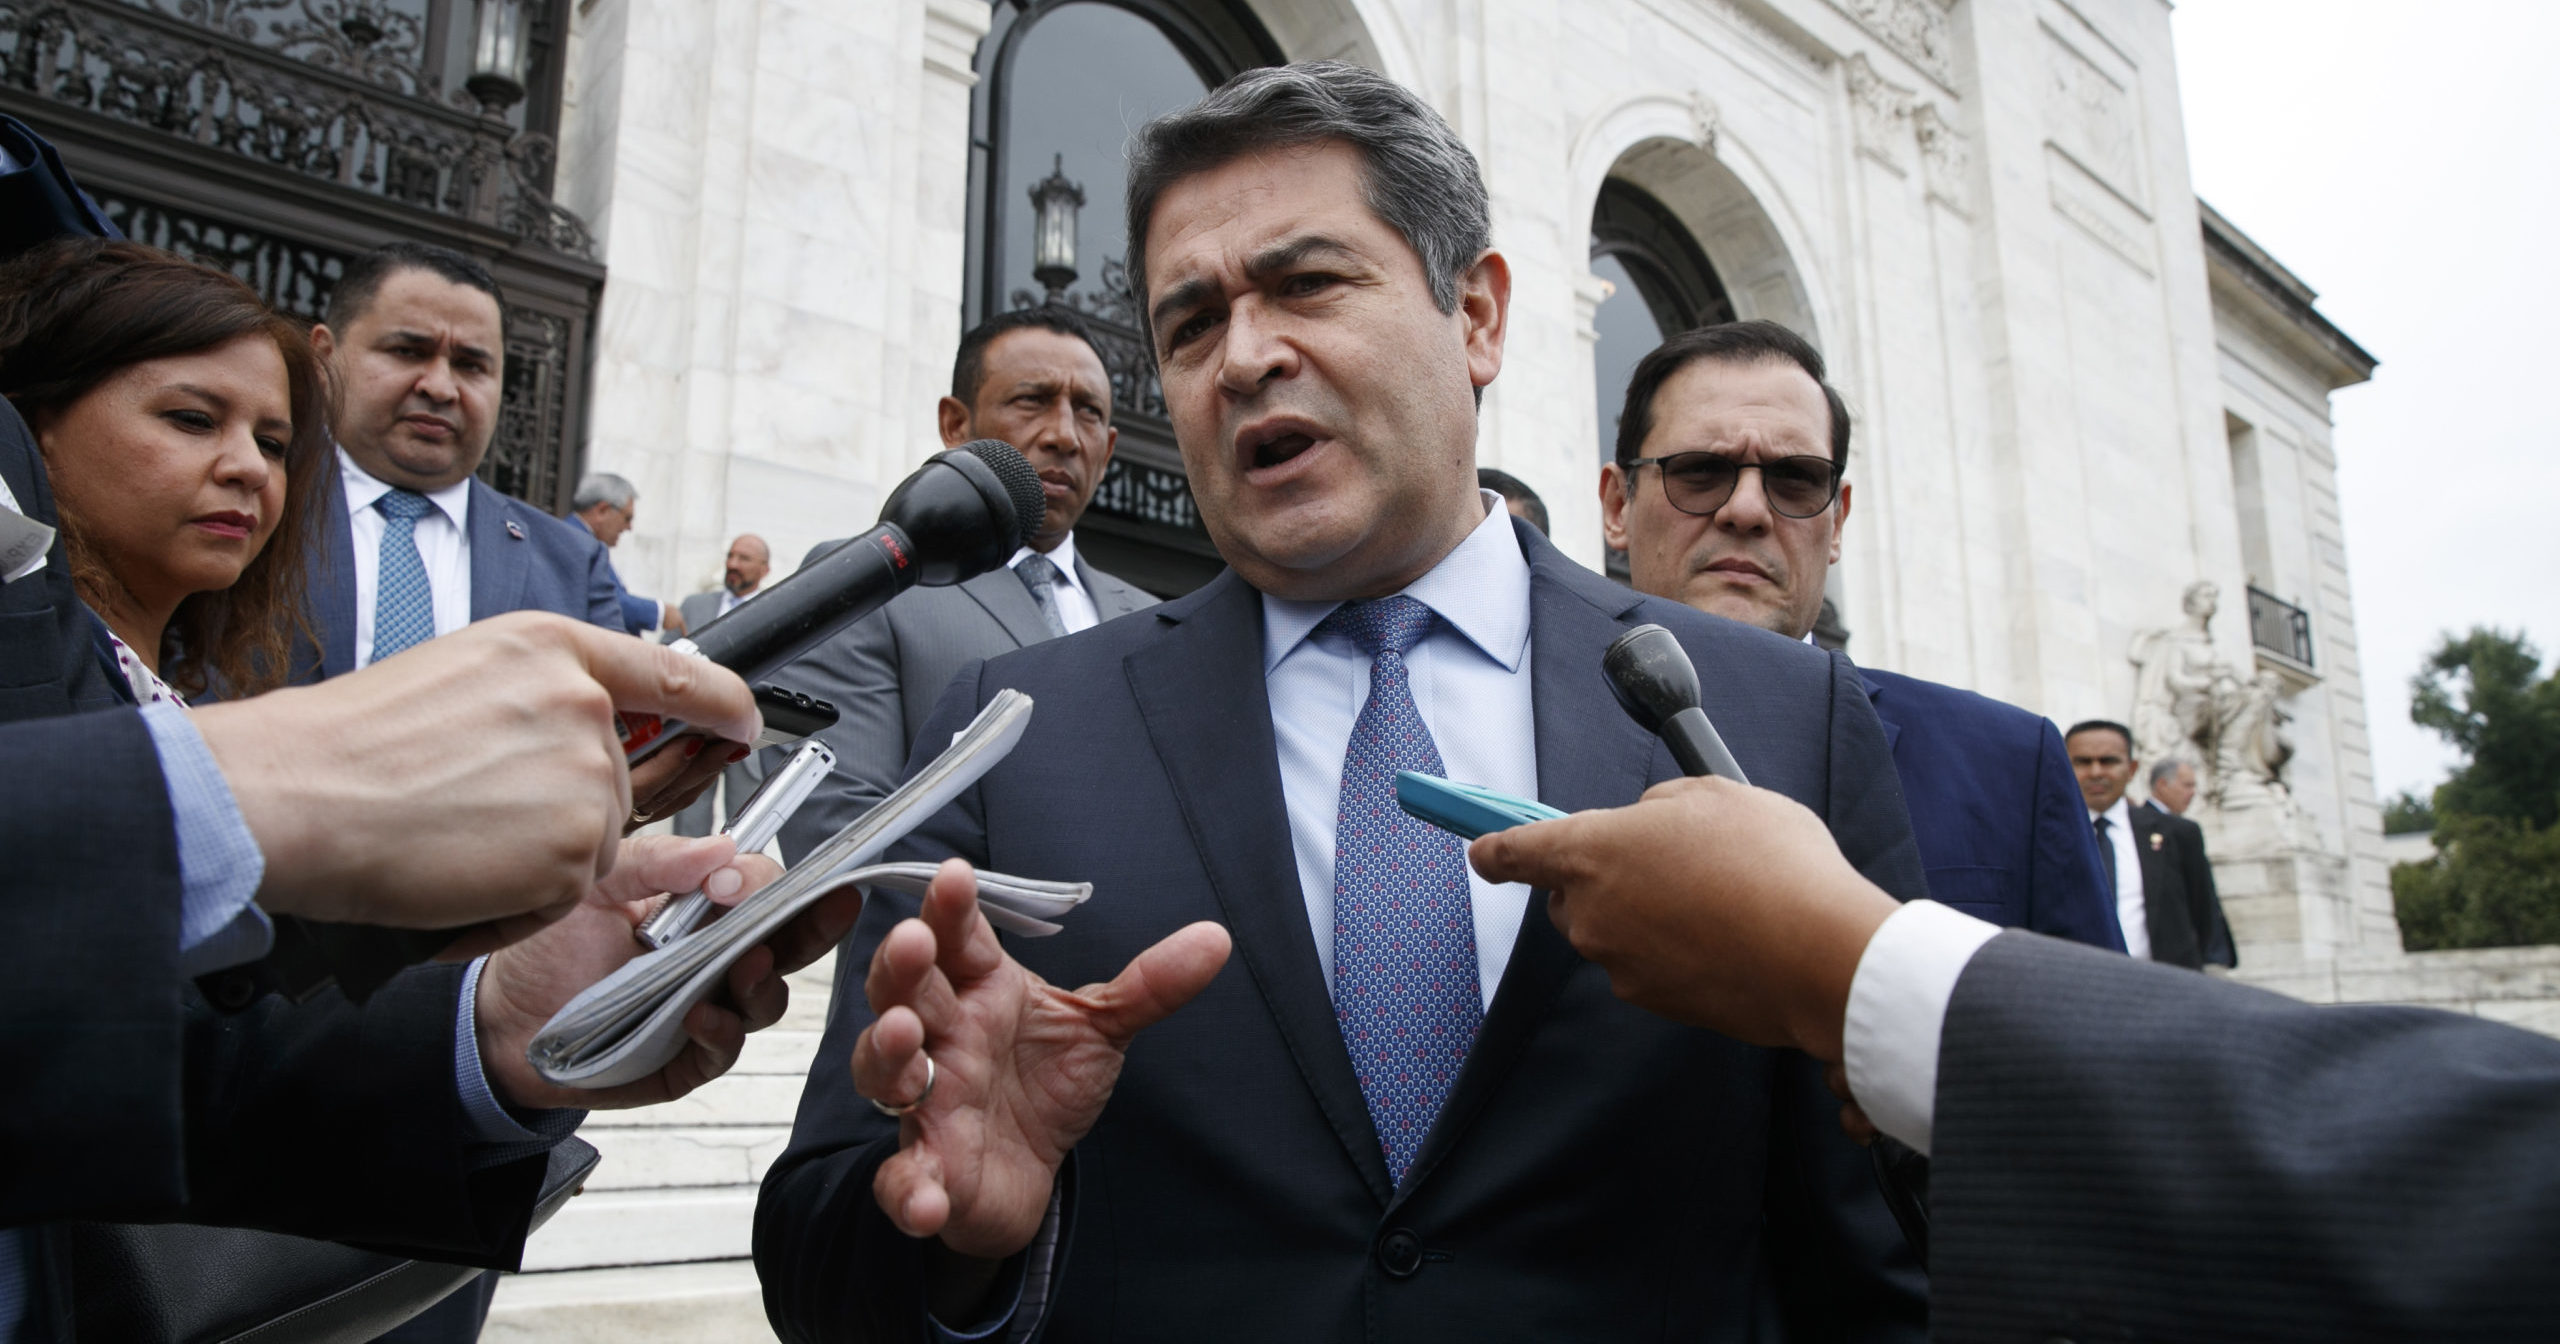 Honduran President Juan Orlando Hernández speaks to reporters as he leaves a meeting at the Organization of American States in Washington, D.C., on Aug. 13, 2019.